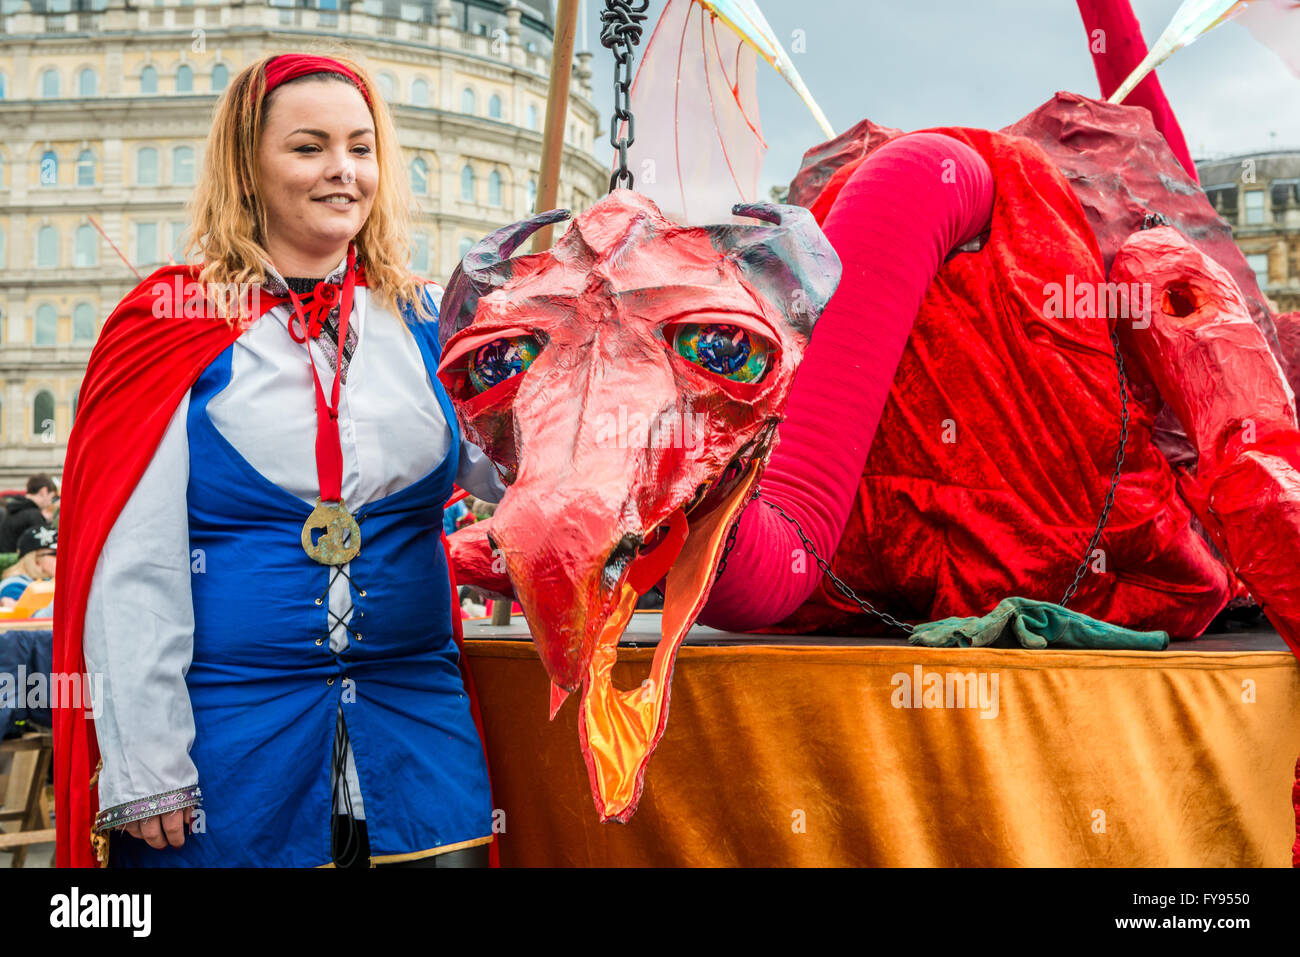 London, UK. 23rd April, 2016. St Georges day celebration at Trafalgar Square. Feast of St Georges festival. Big red interactive puppet dragon. Credit:  Elena Chaykina/Alamy Live News Stock Photo